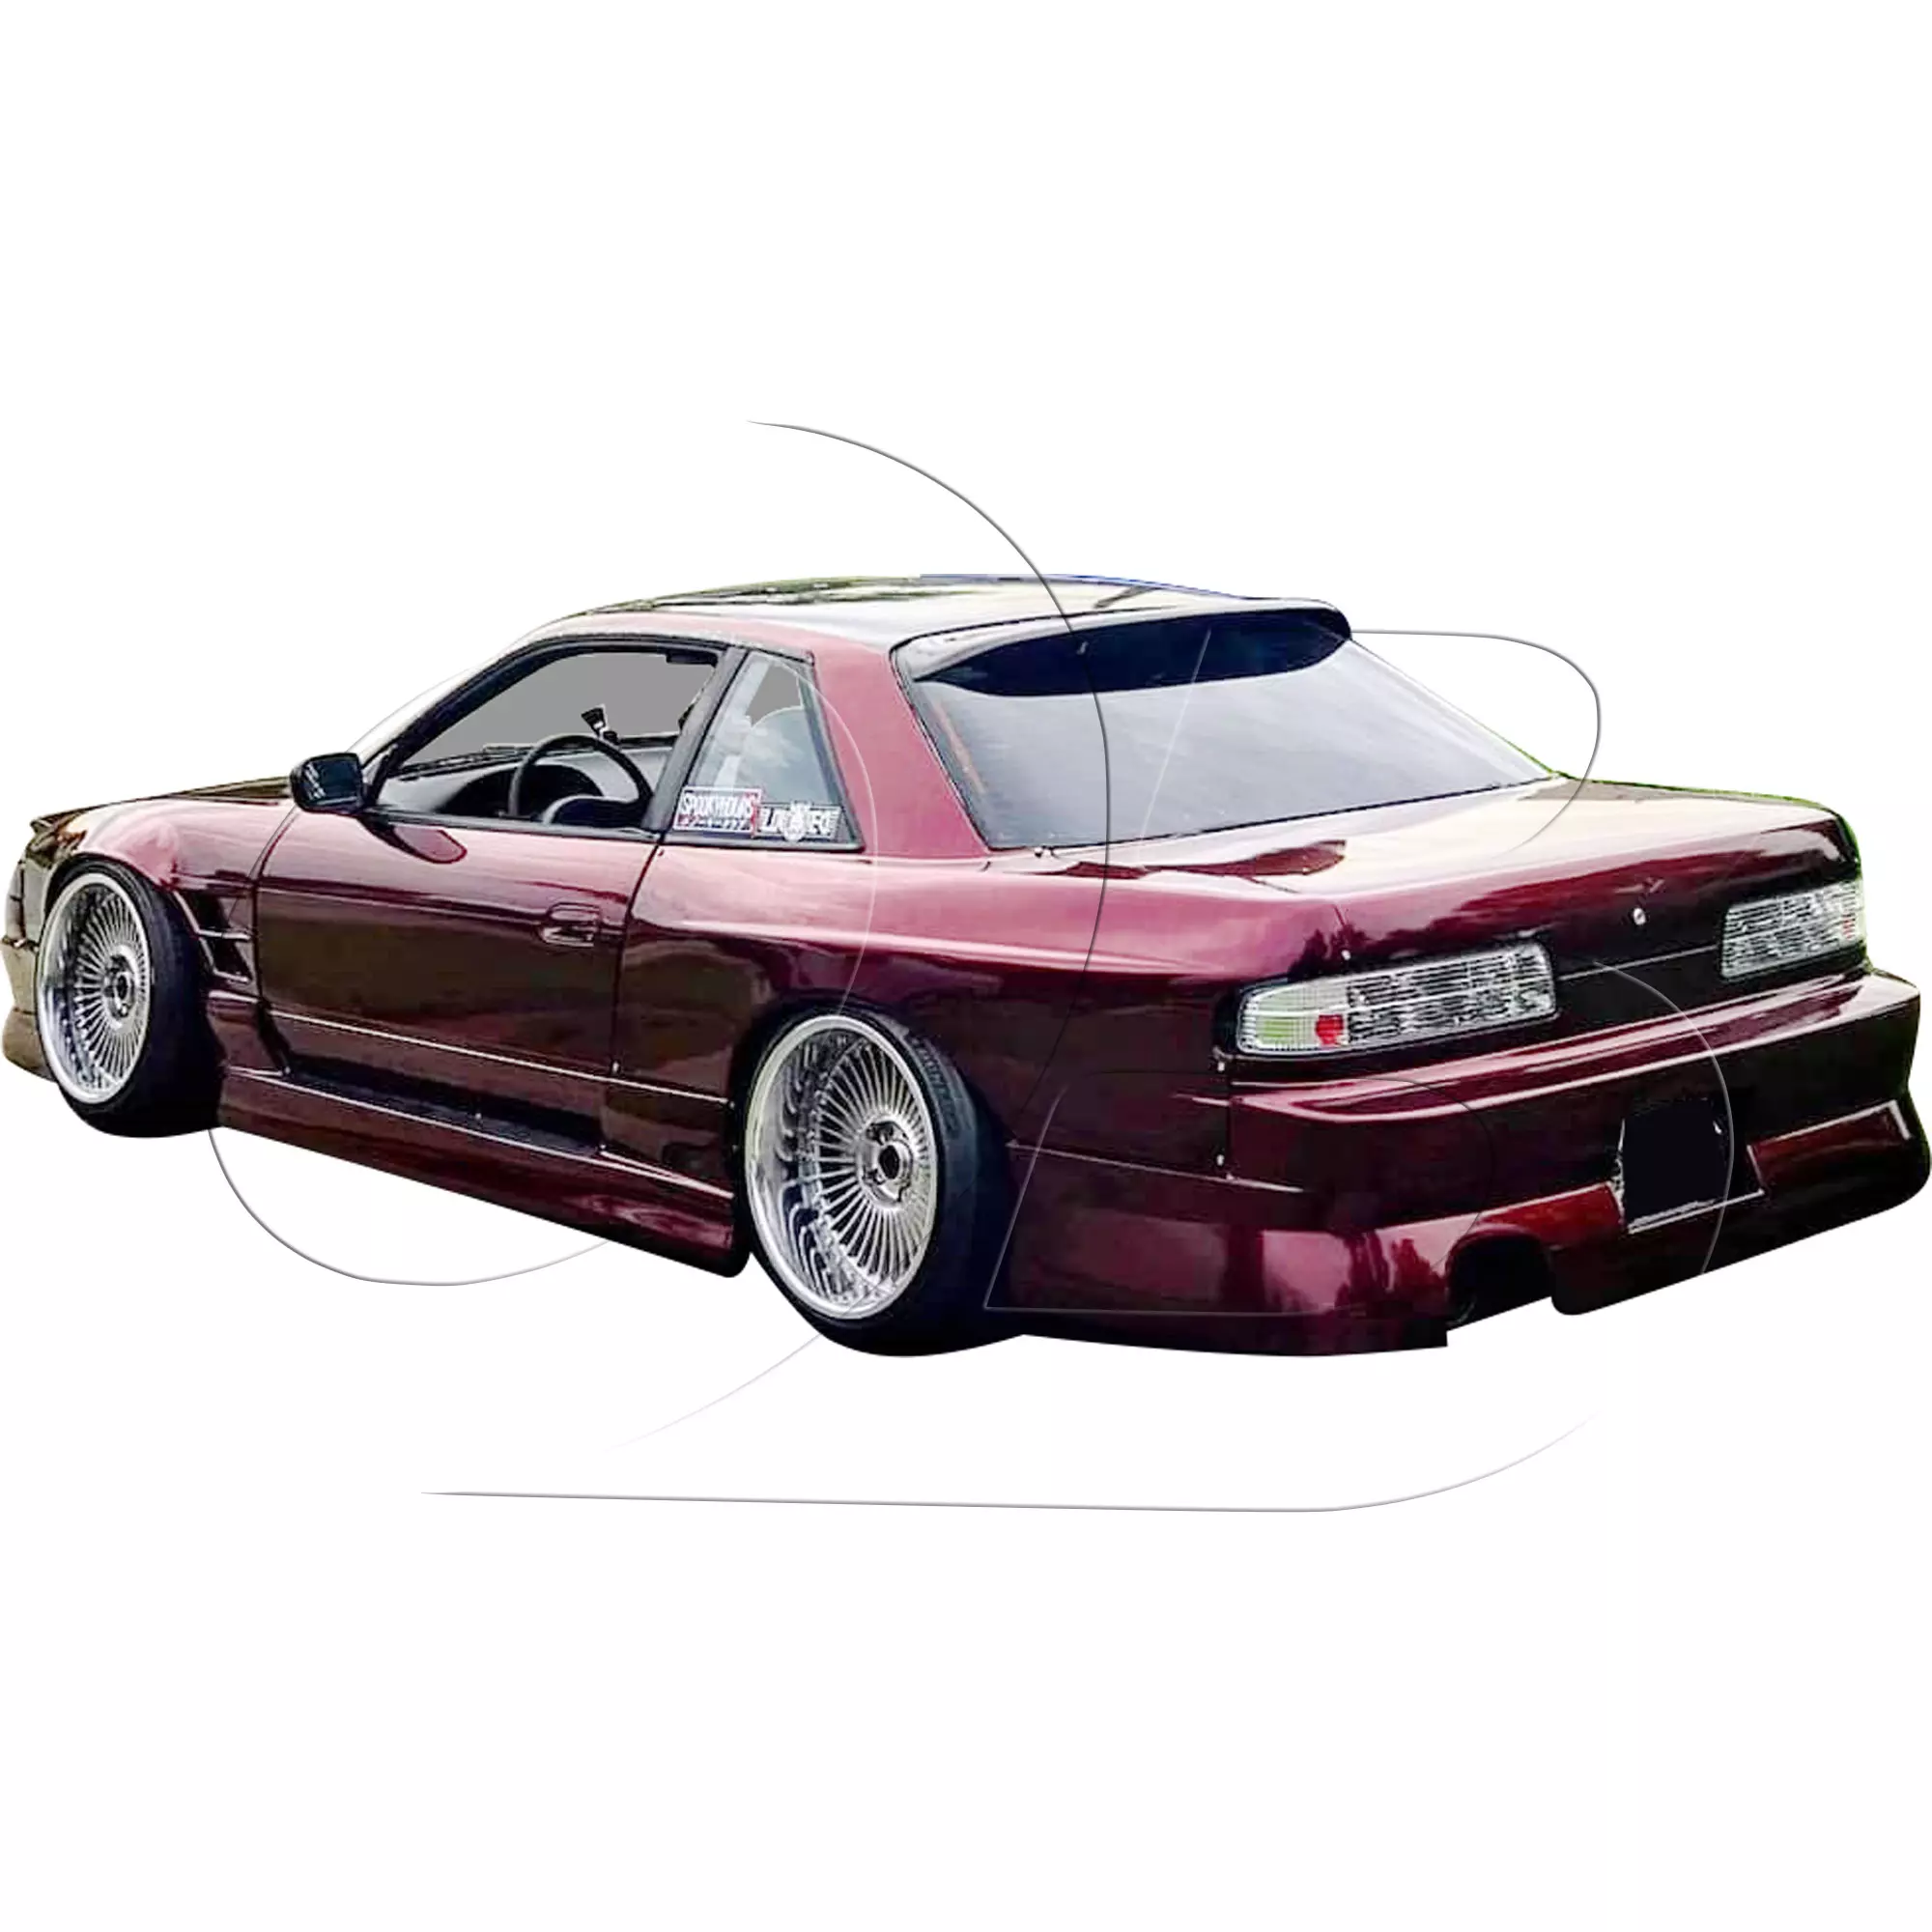 KBD Urethane Bsport2 Style 4pc Full Body Kit > Nissan 240SX 1989-1994 > 2dr Coupe - Image 90